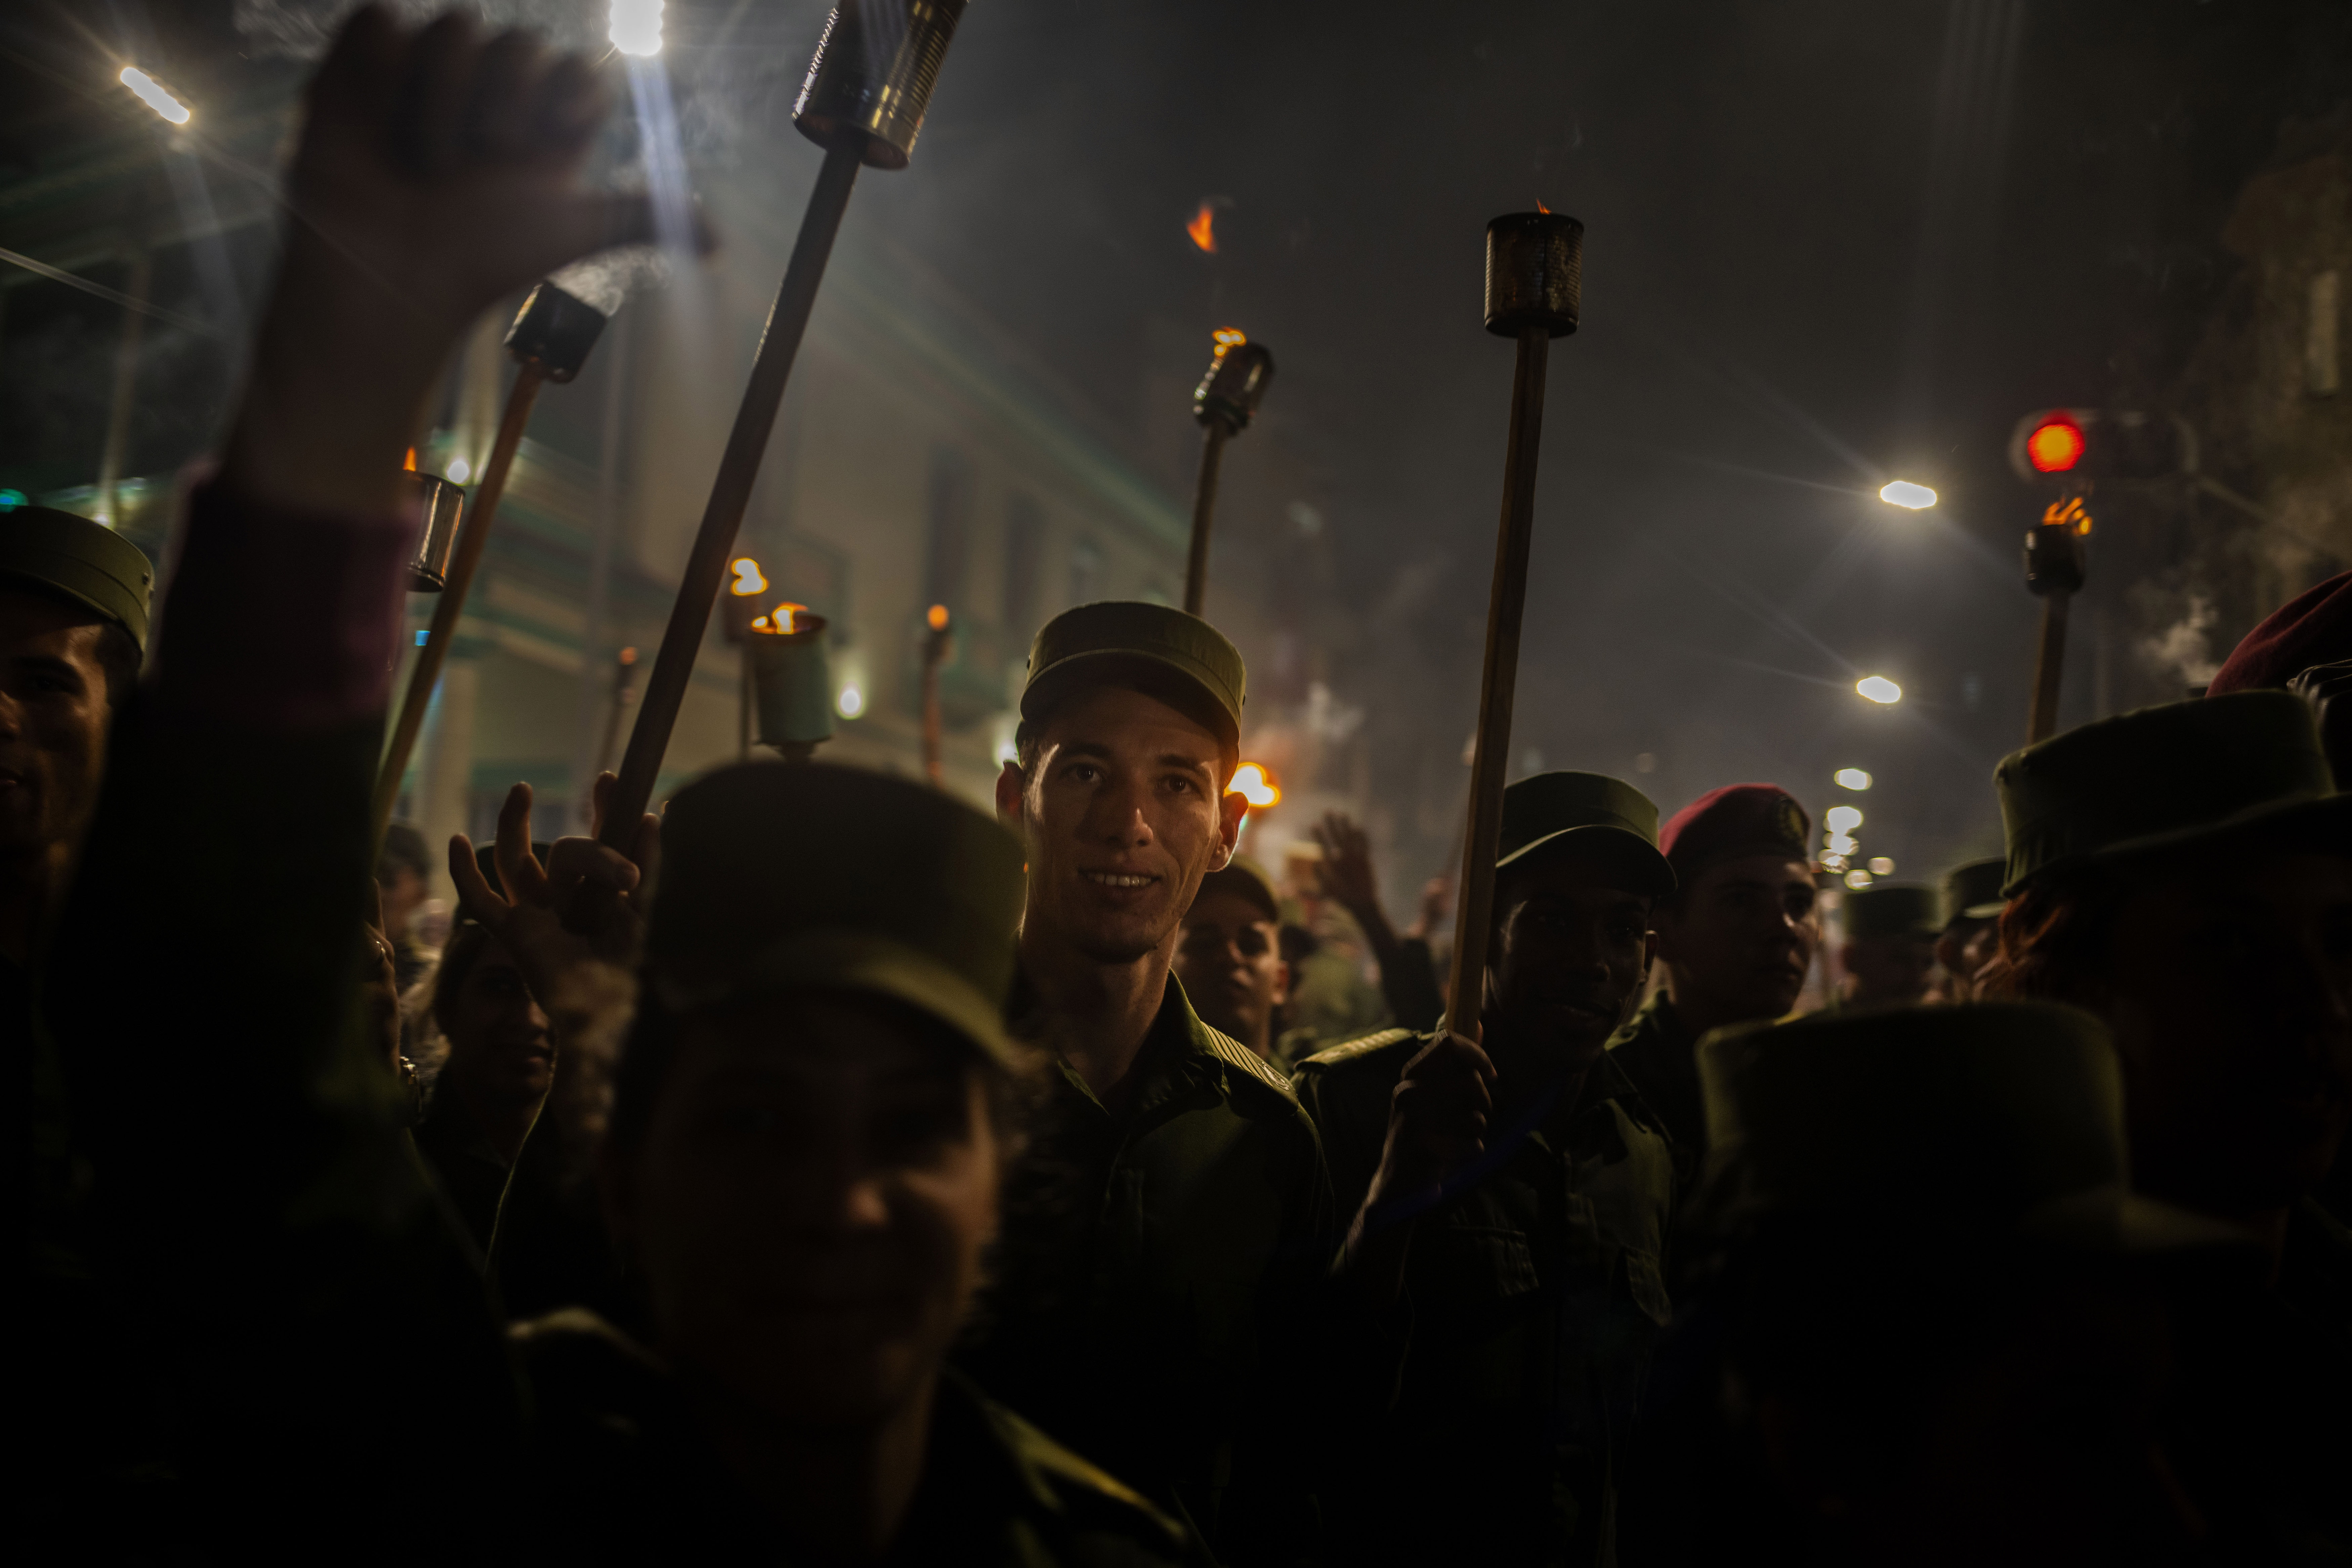 People take part in a march with torches to mark the 167th anniversary of the birth of Cuba's national independence hero Jose Marti, in Havana, Cuba, Monday, Jan. 27, 2020. (AP Photo/Ramon Espinosa)